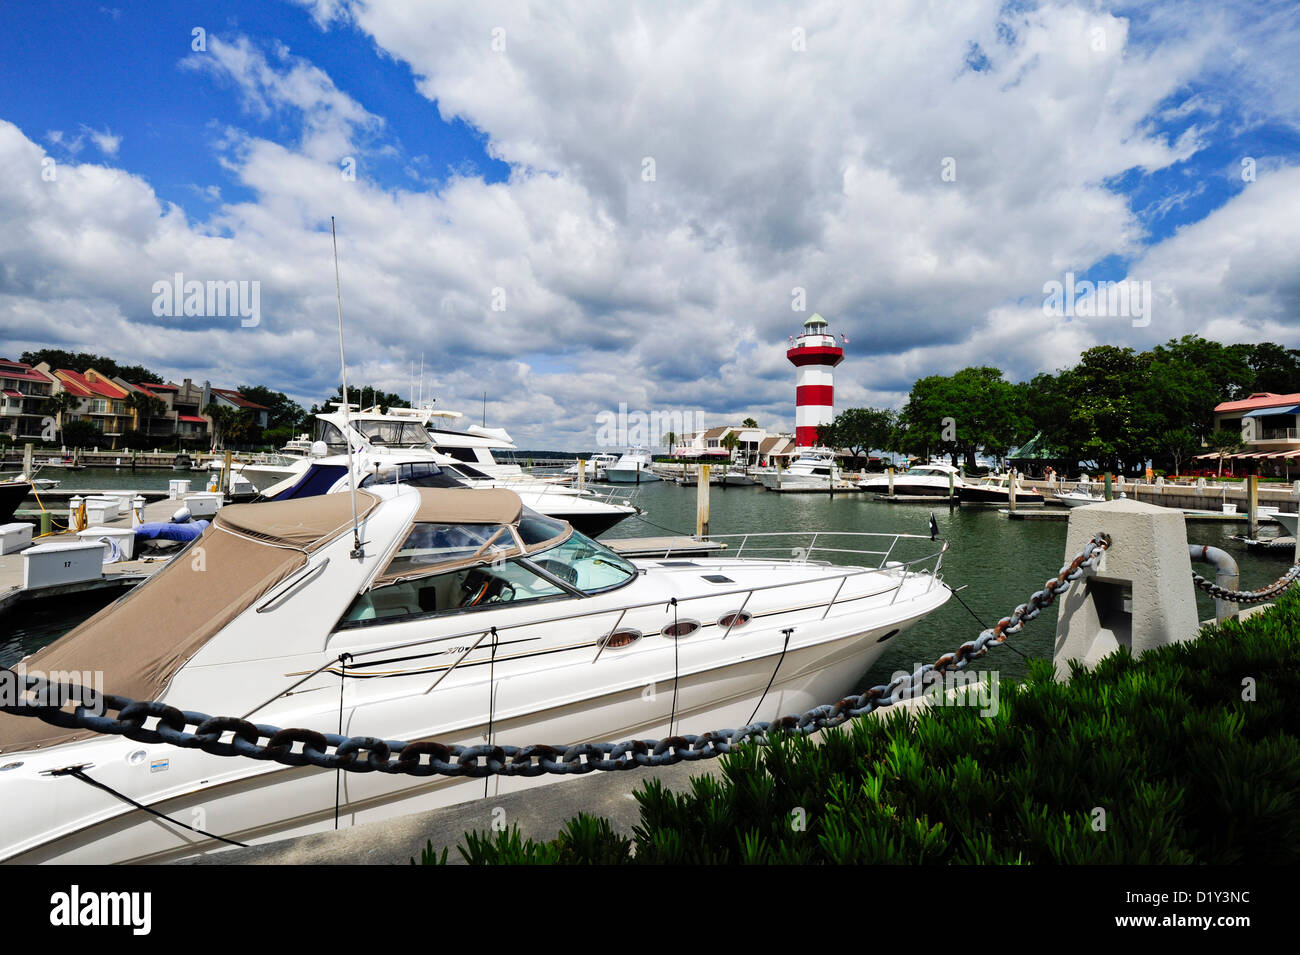 Dramatic clouds move in over Harbour Town Marina on Hilton Head Island, SC. Stock Photo